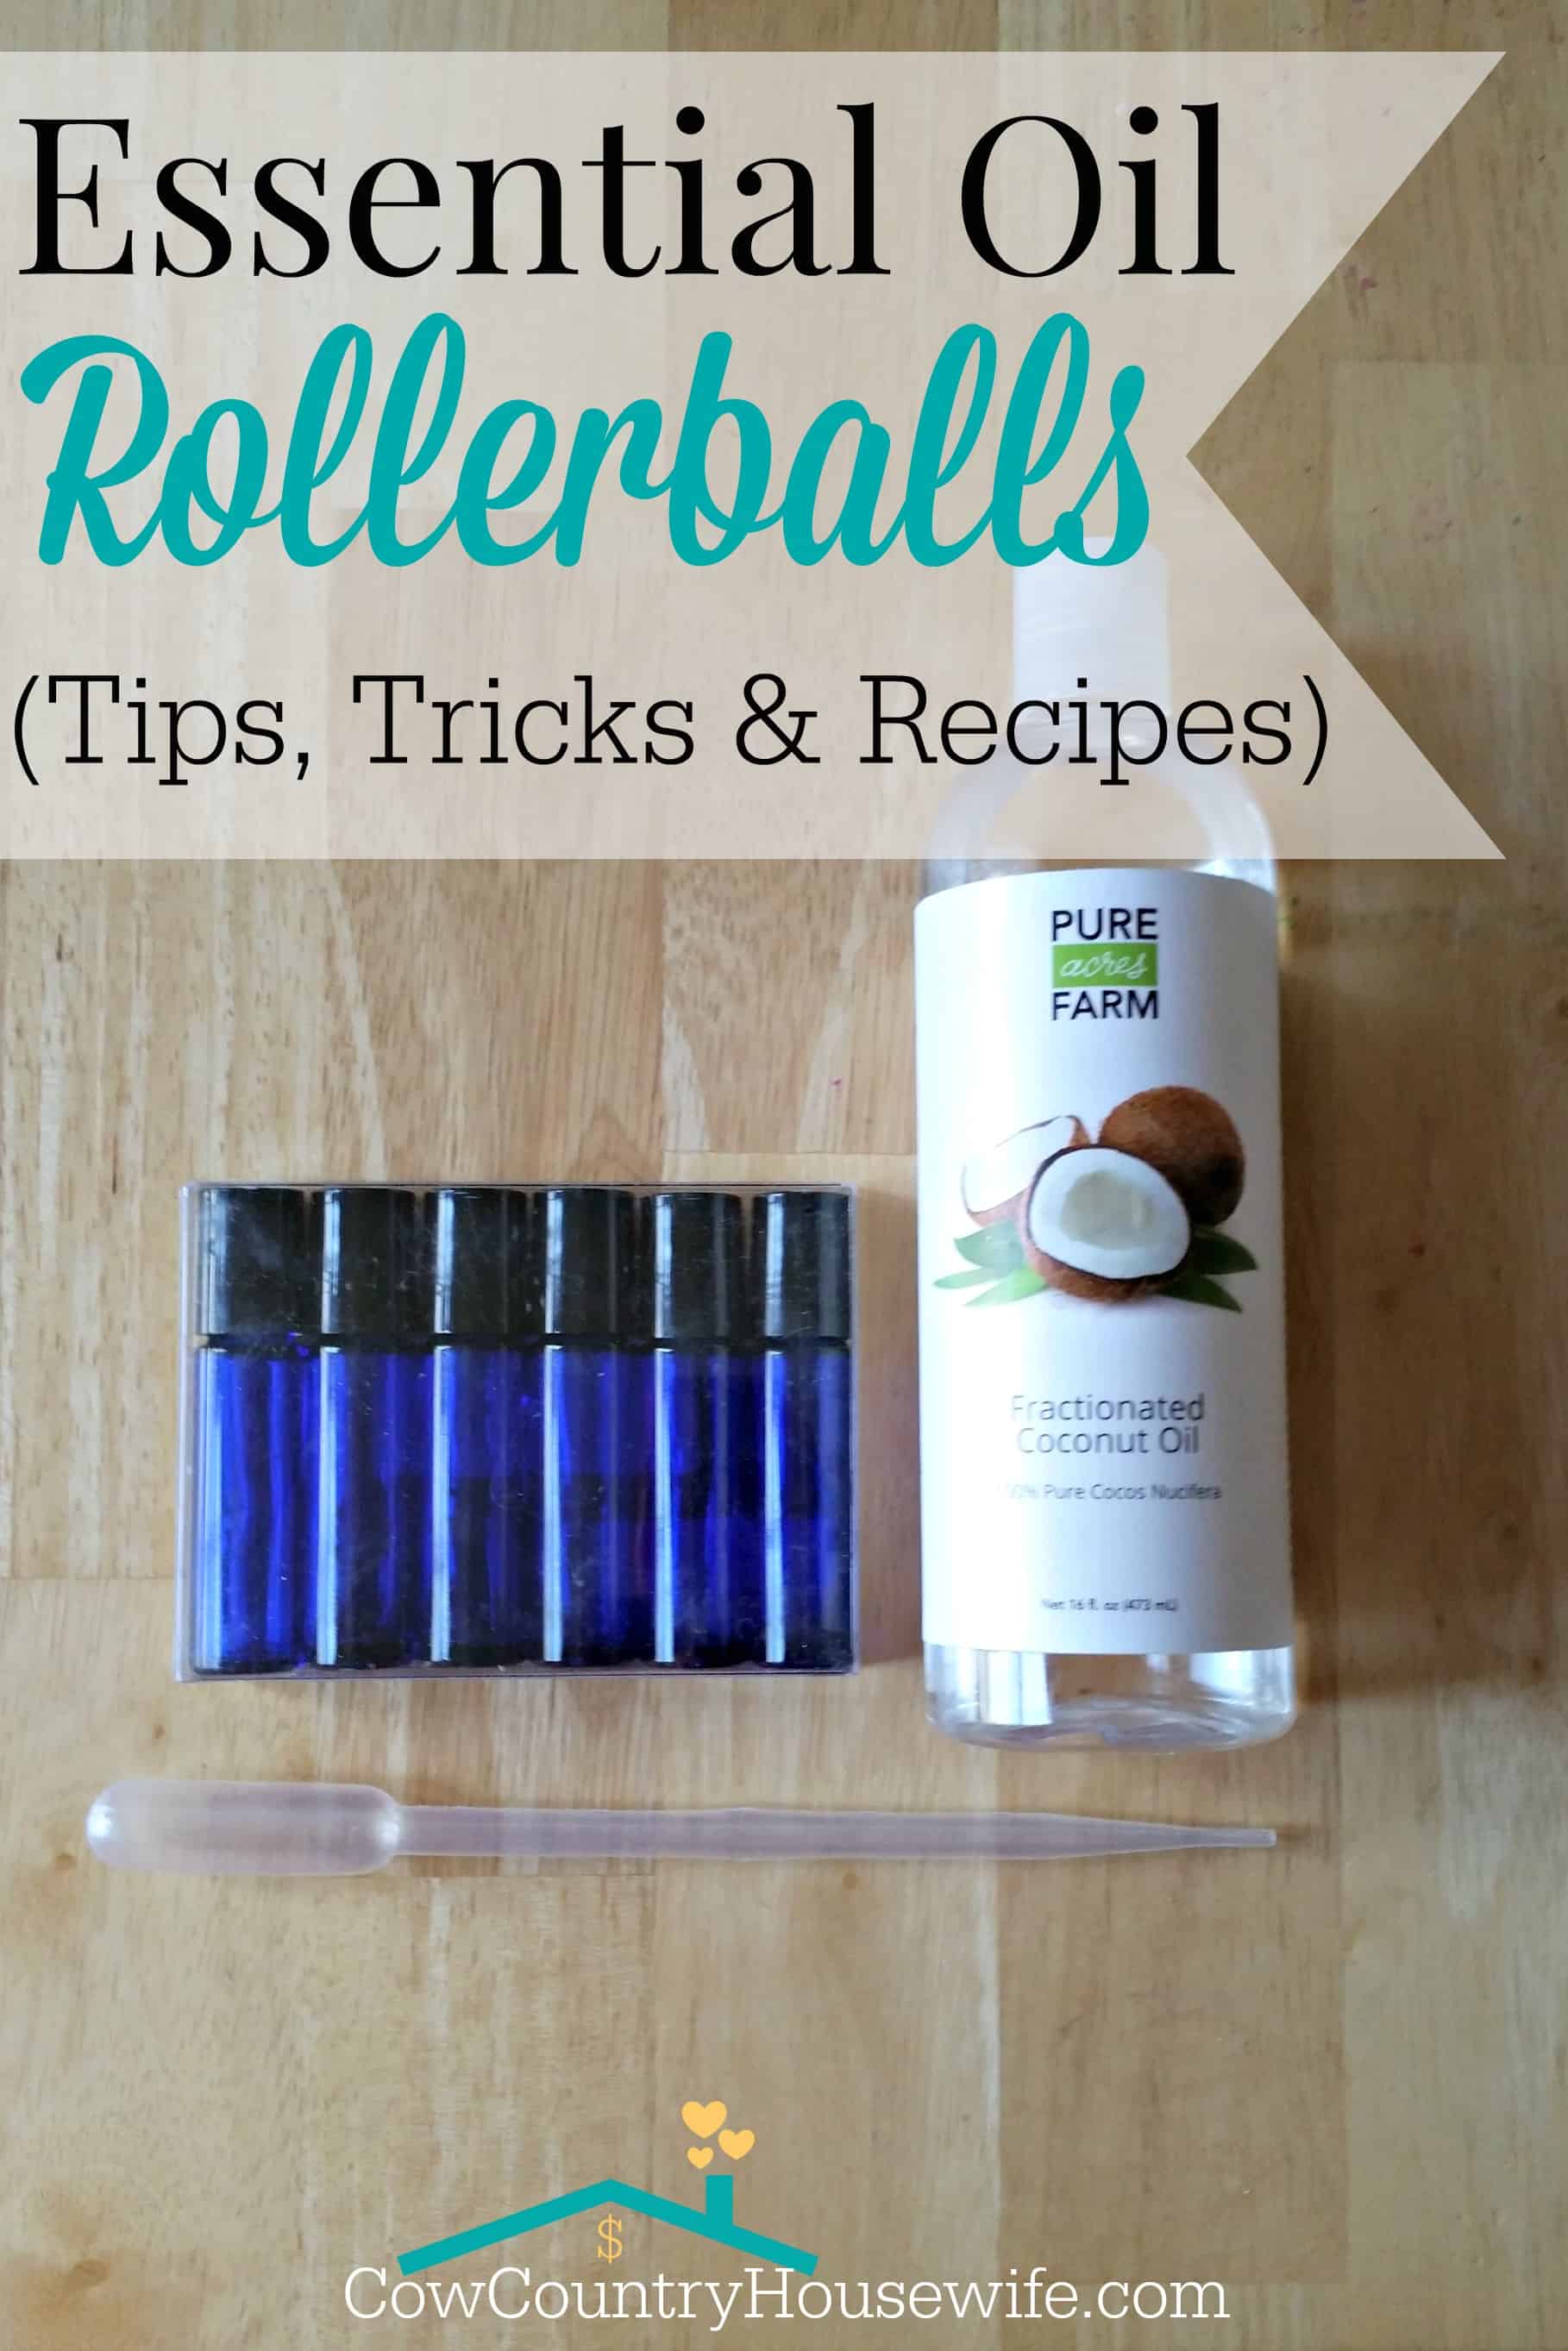 Essential Oil Rollerballs - Tips, Tricks and Recipes, how to make essential oil roller bottles, how to make essential oil roller bottles